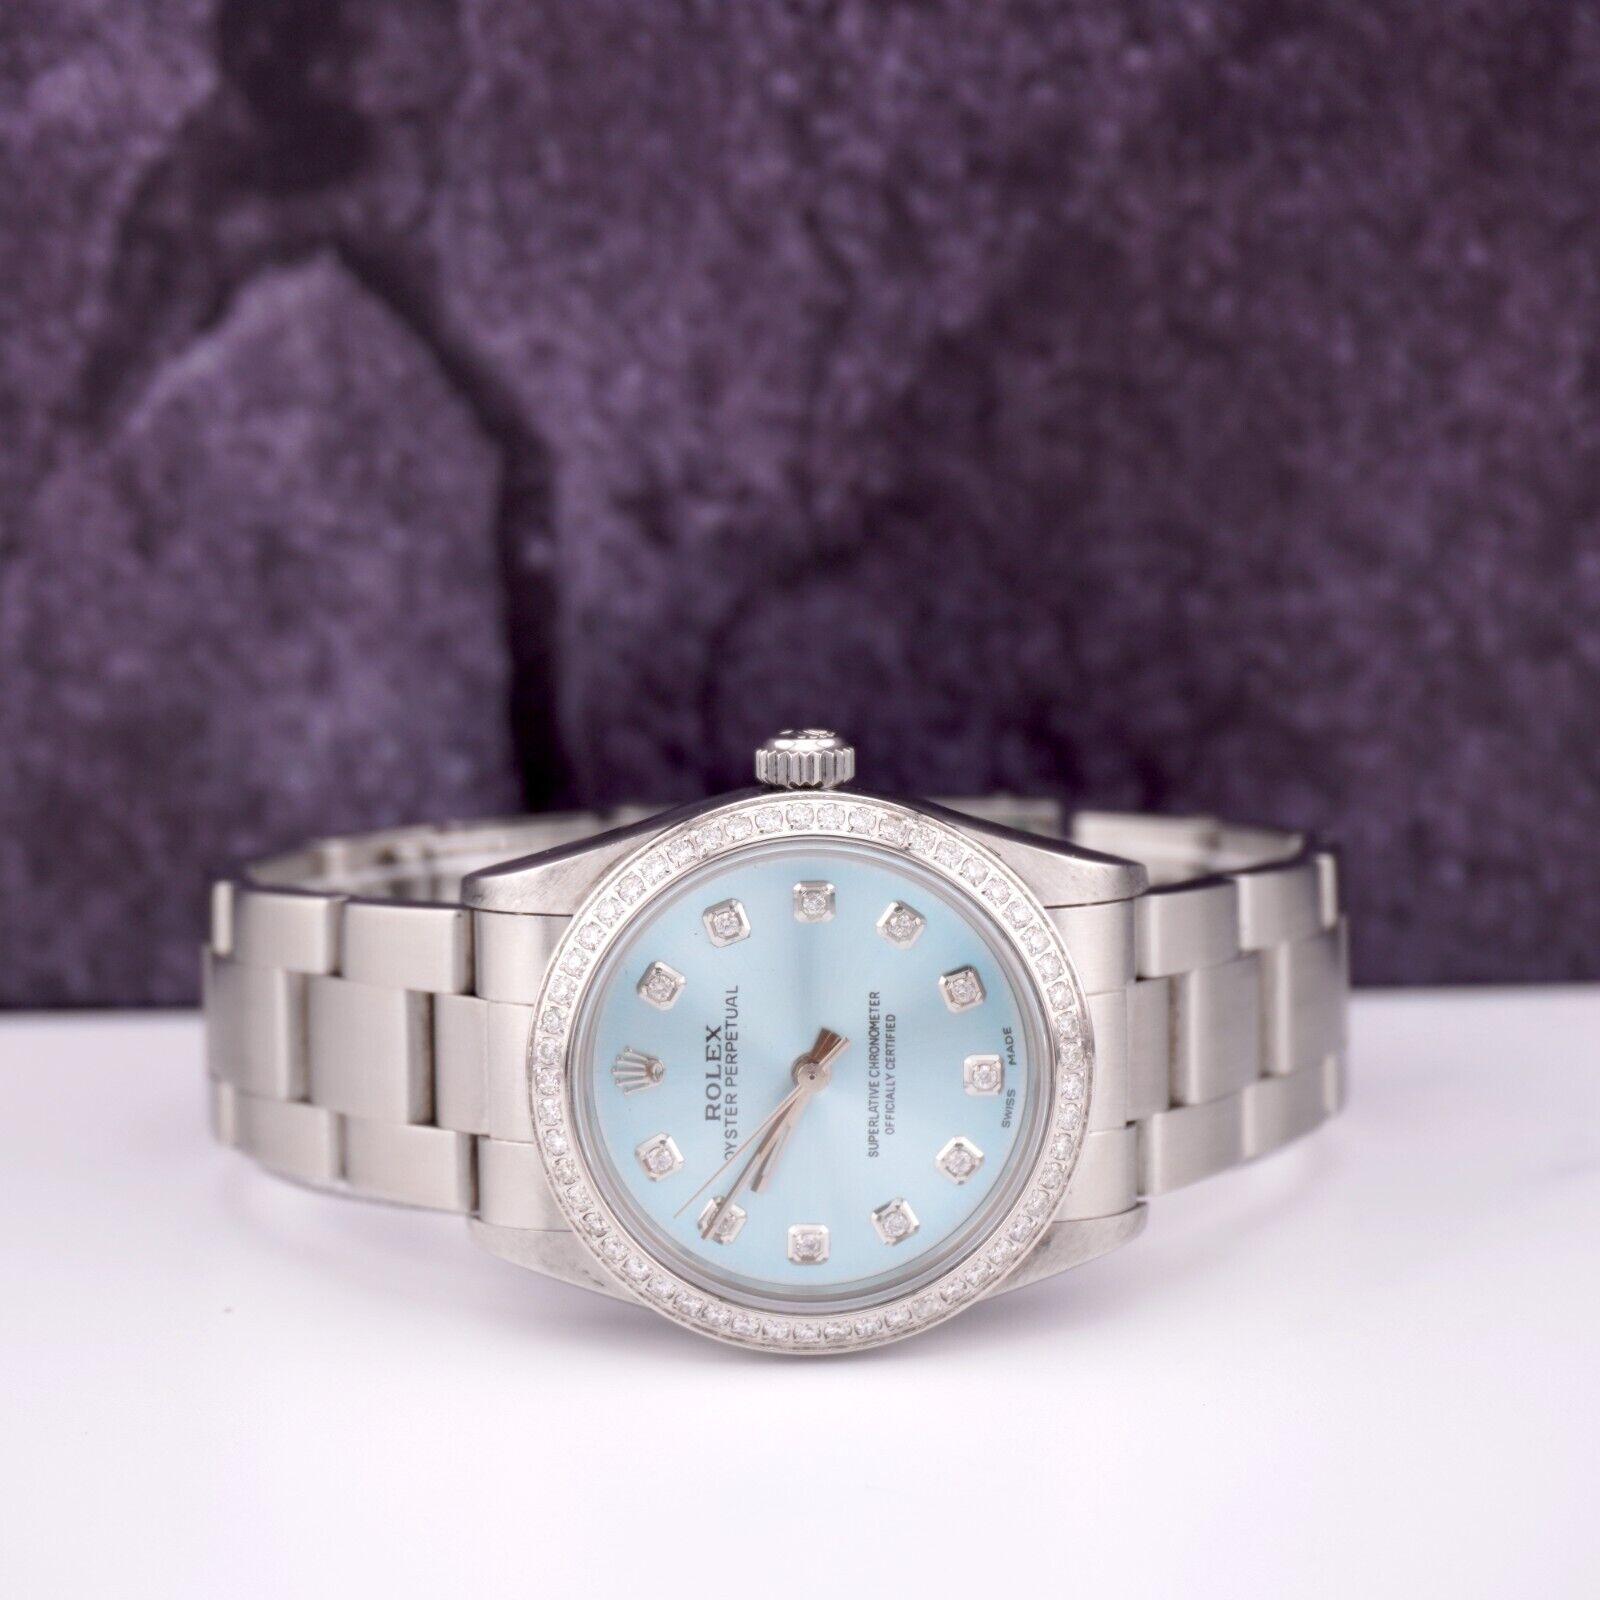 Rolex Oyster Perpetual 31mm Watch customized with 1.75 carats of Genuine Diamonds. The Entire Watch Is Genuine Only Custom Diamond Dial and Bezel is added. The entire bezel and Dial have been beautifully handset in white 